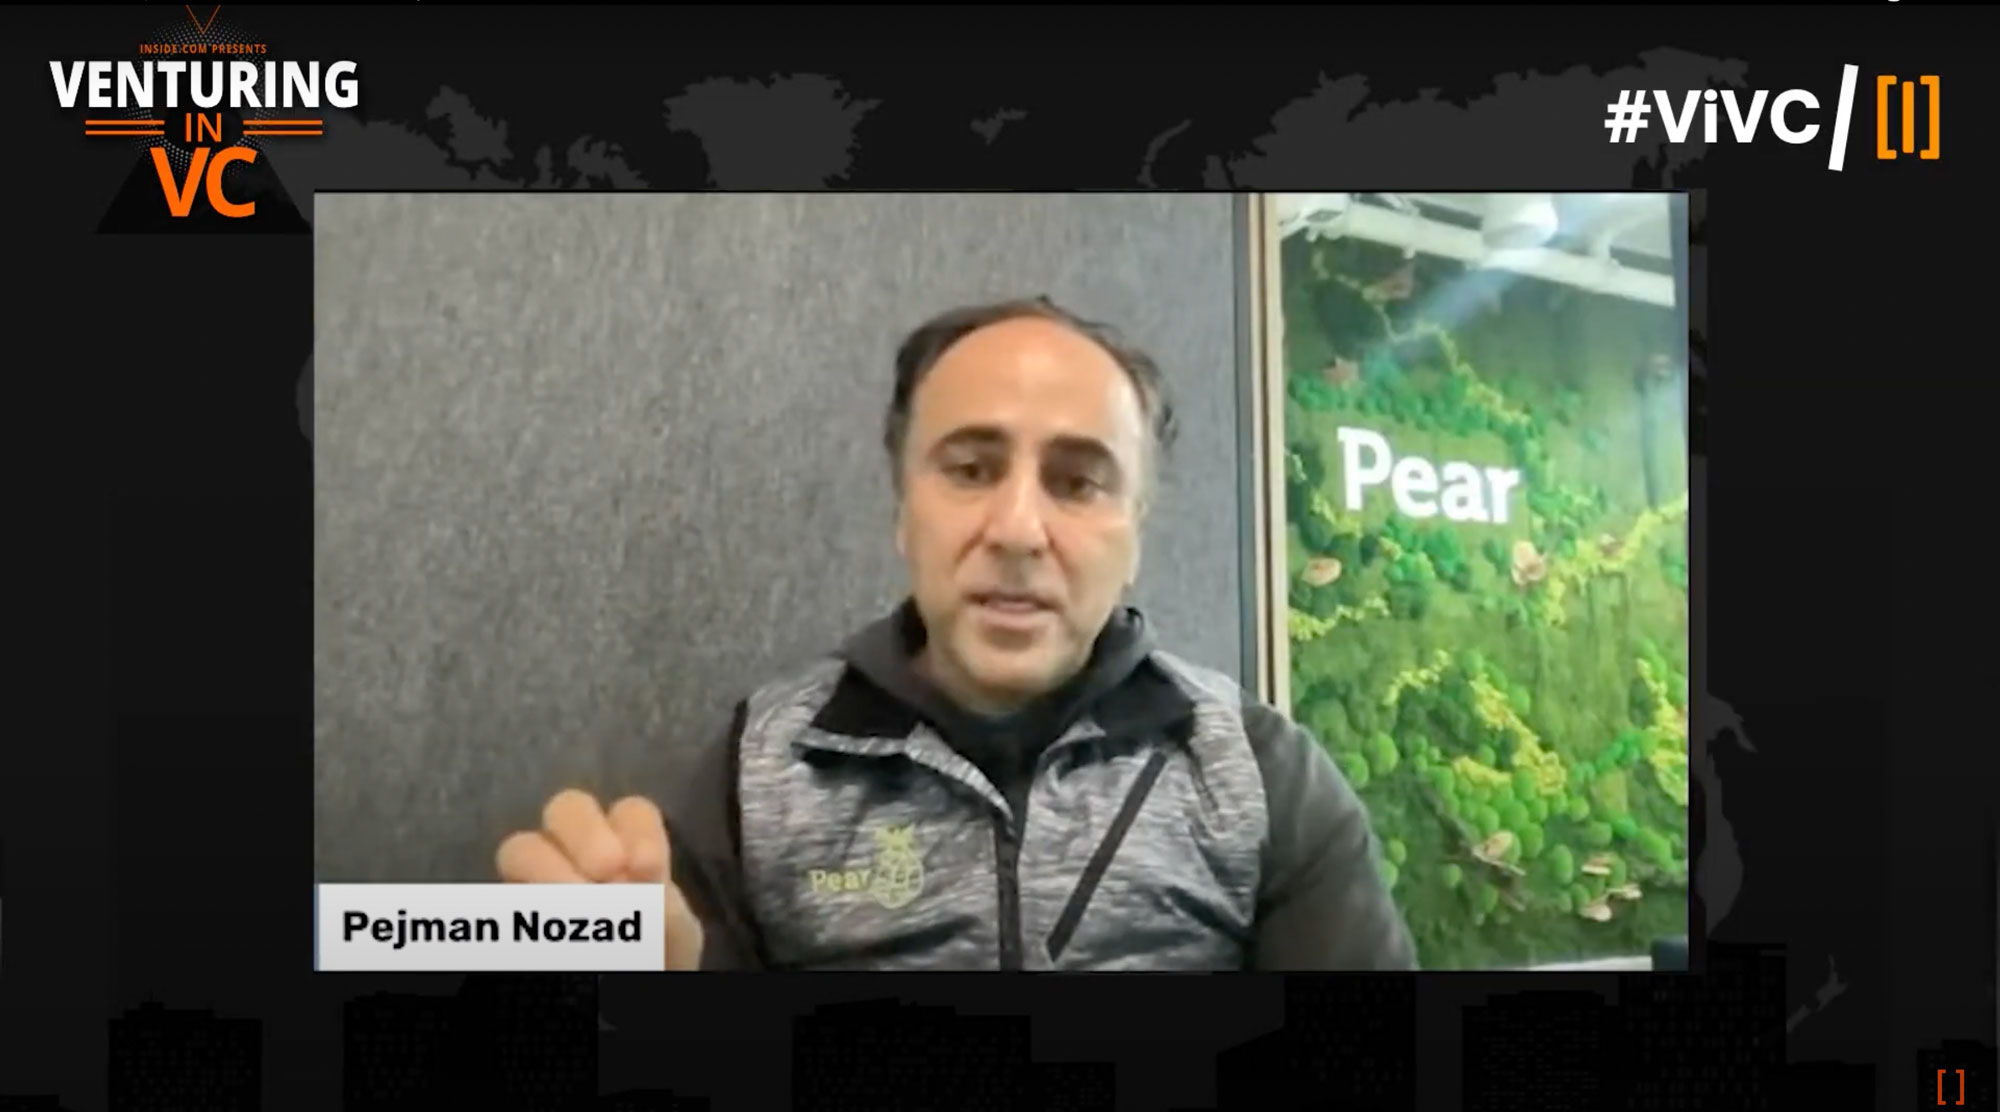 From Rugs to Riches with Pejman Nozad from Pear.VC